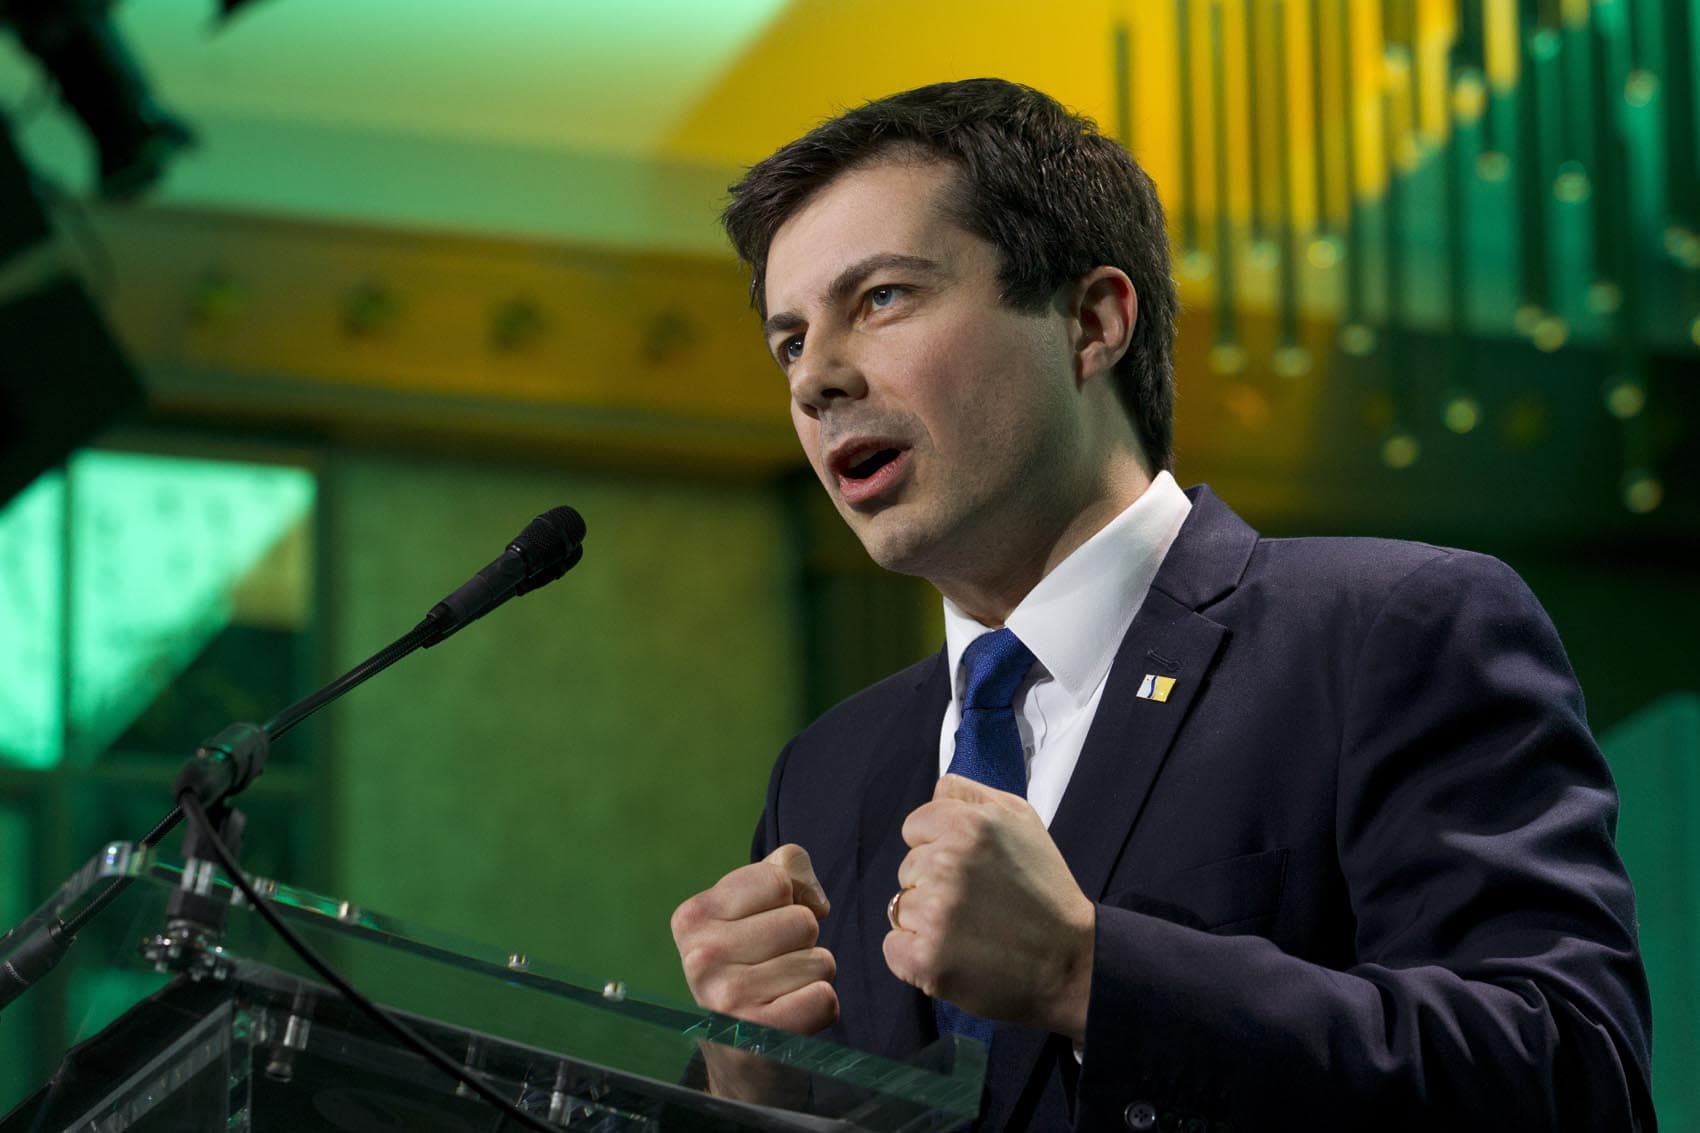 Meet Pete Buttigieg, The 37-Year-Old South Bend Mayor And Potential 2020 Candidate ...